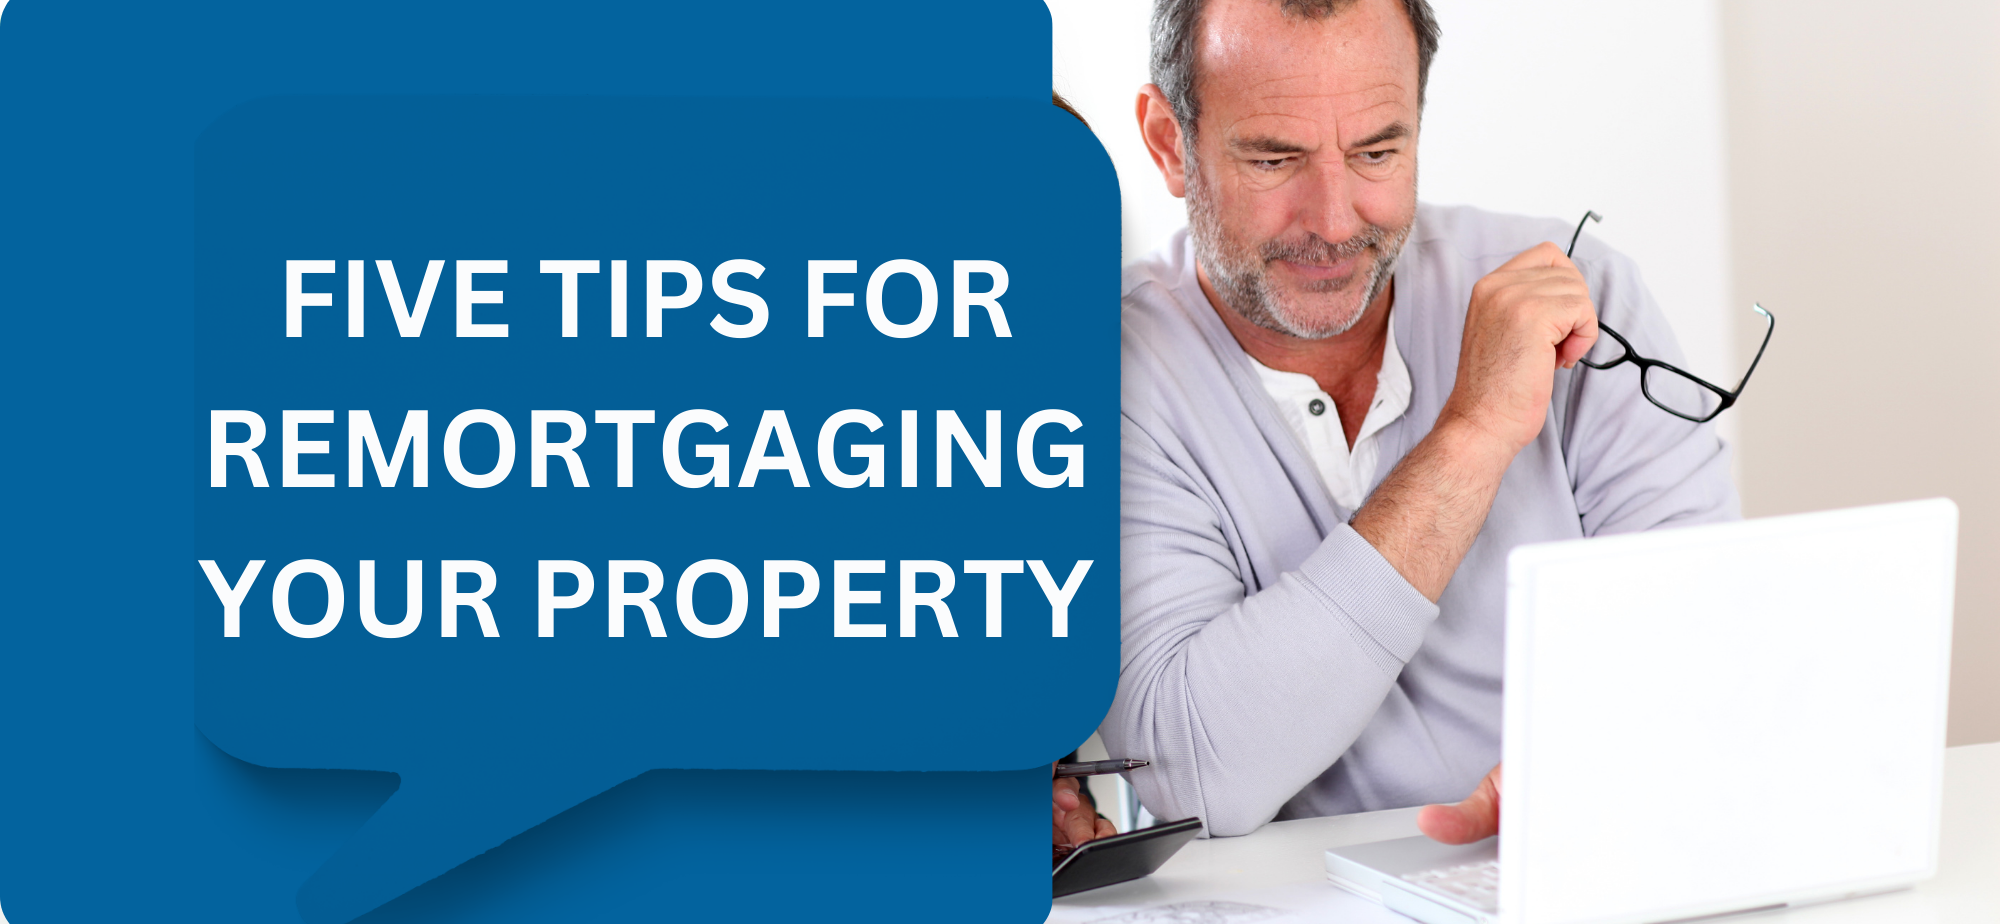 5 tips for remortgaging